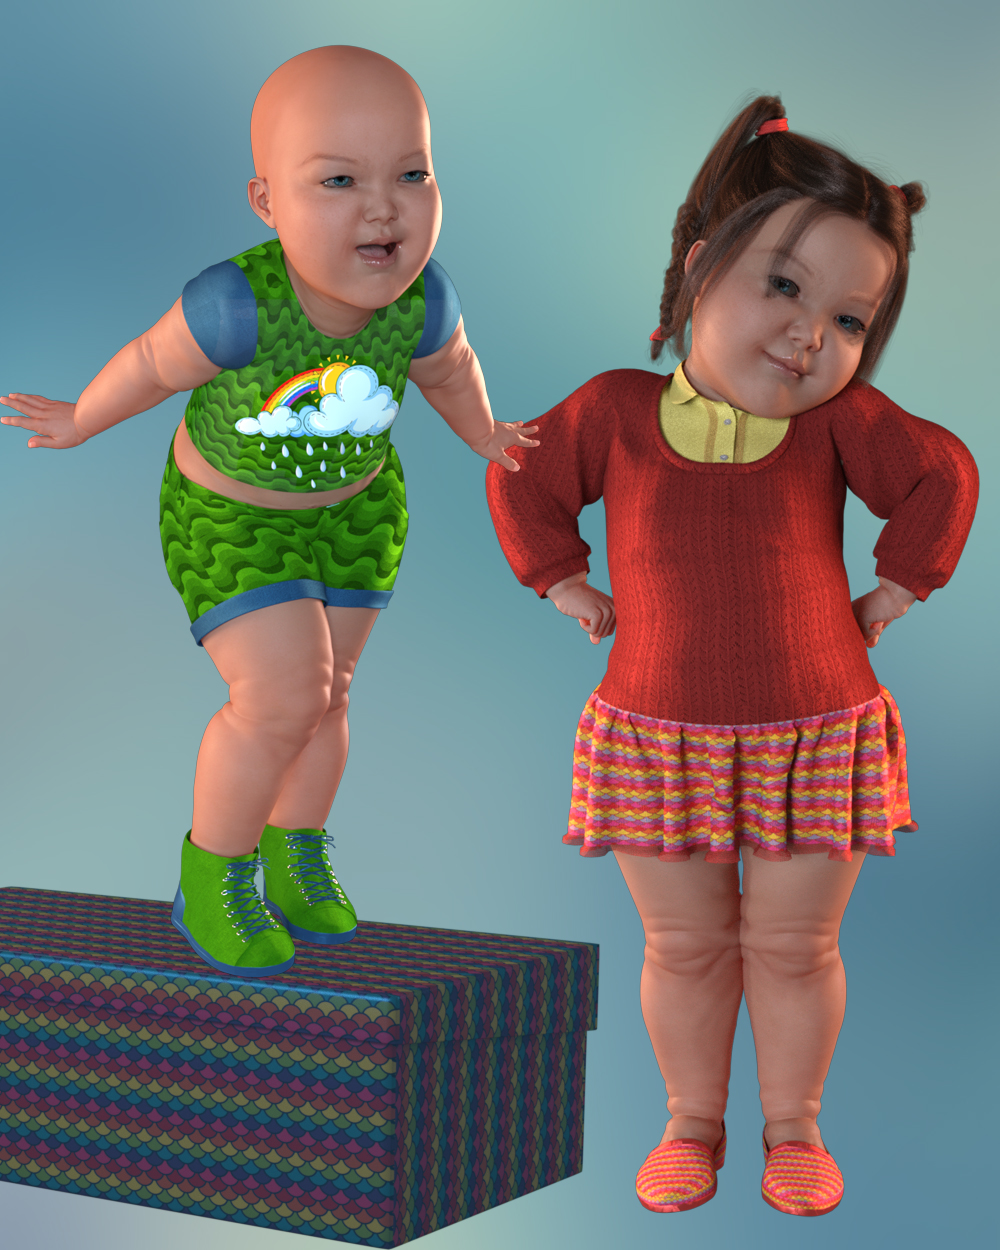 Baby Oh Baby Shaders and Decals by: hotlilme74TwiztedMetal, 3D Models by Daz 3D